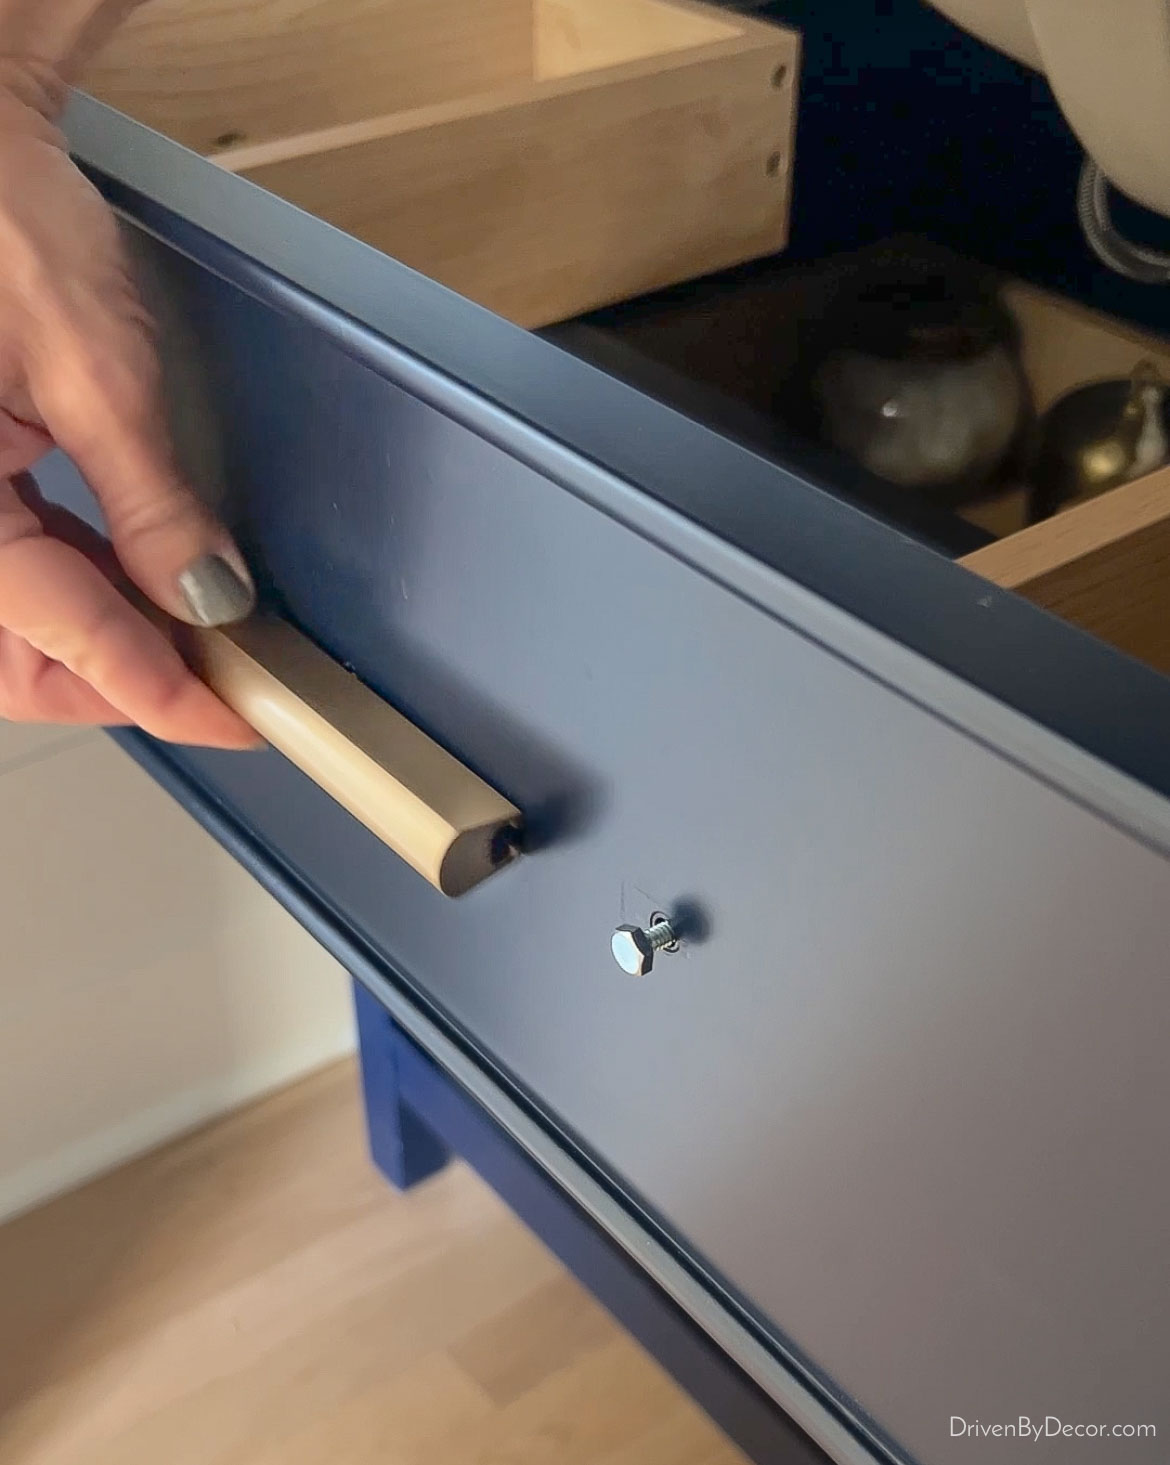 Sliding pulls over screw heads - the perfect solution for cabinet holes that are an odd size